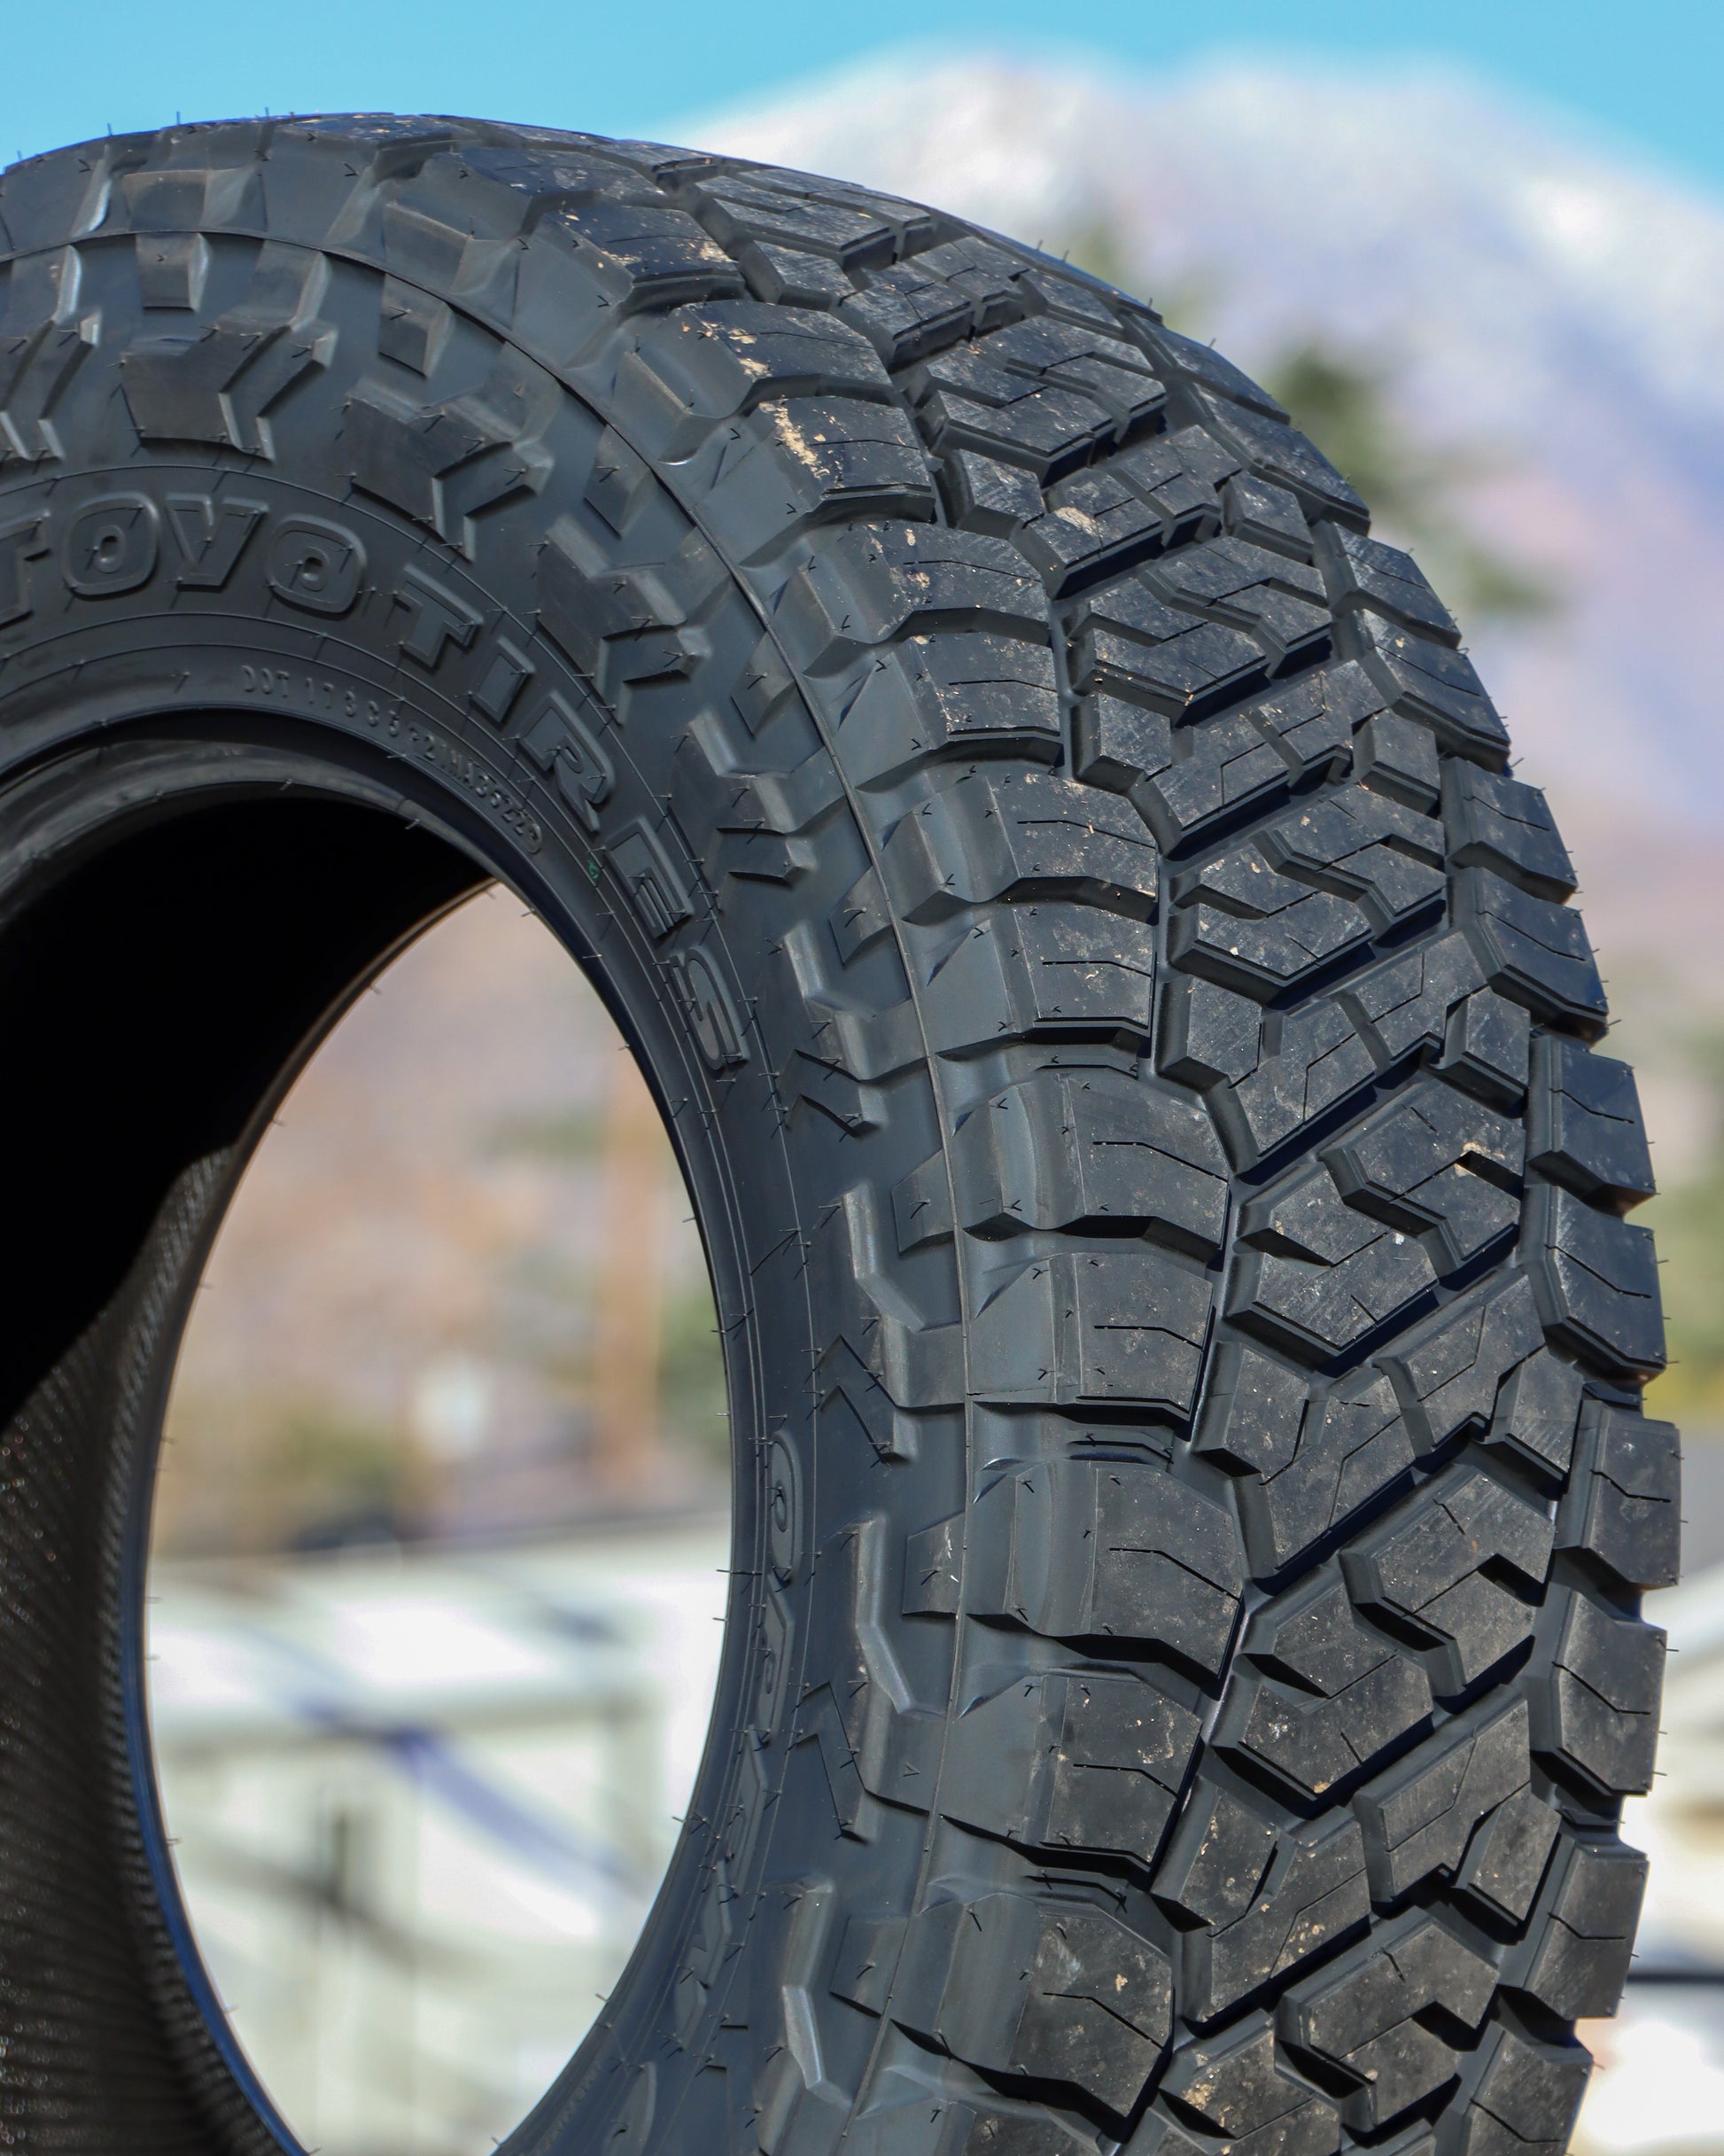 Closeup of tread and sidewall of the Toyo Open Country R/T Trail Tire.